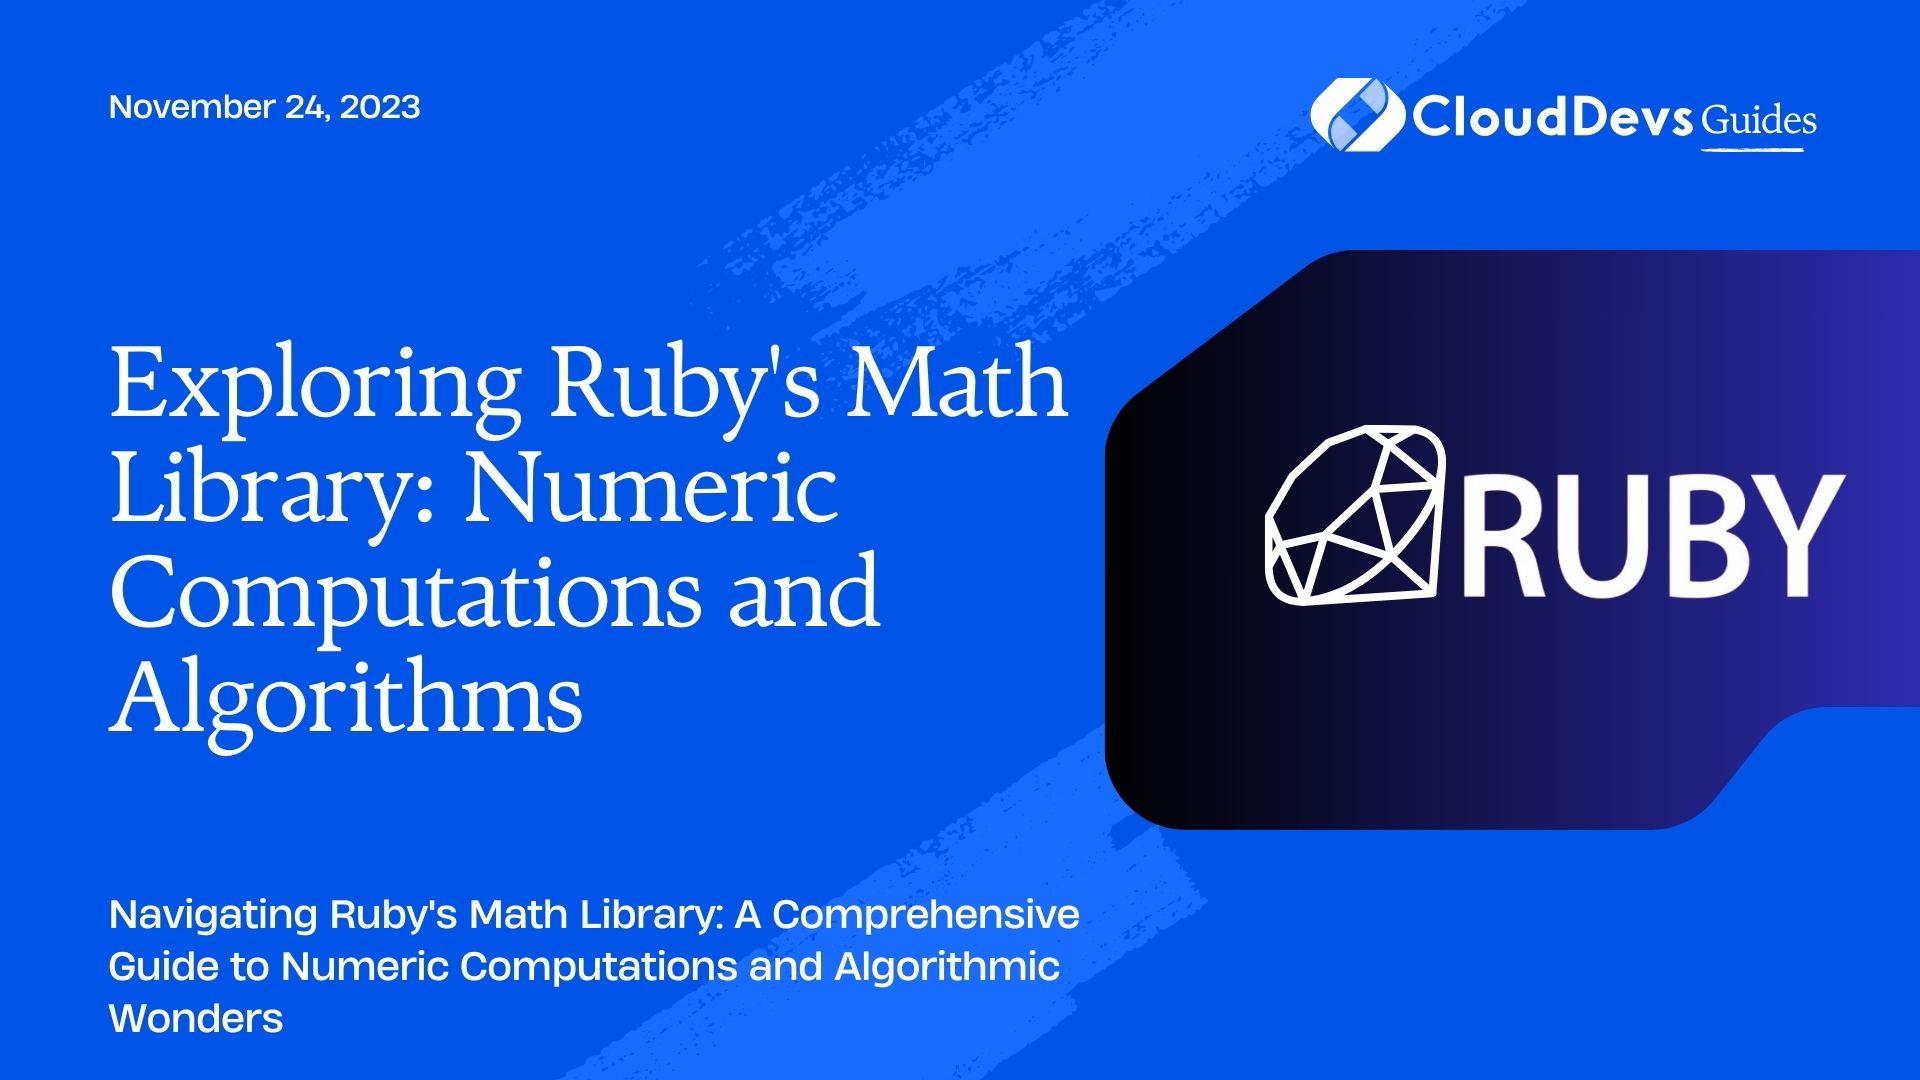 Exploring Ruby's Math Library: Numeric Computations and Algorithms